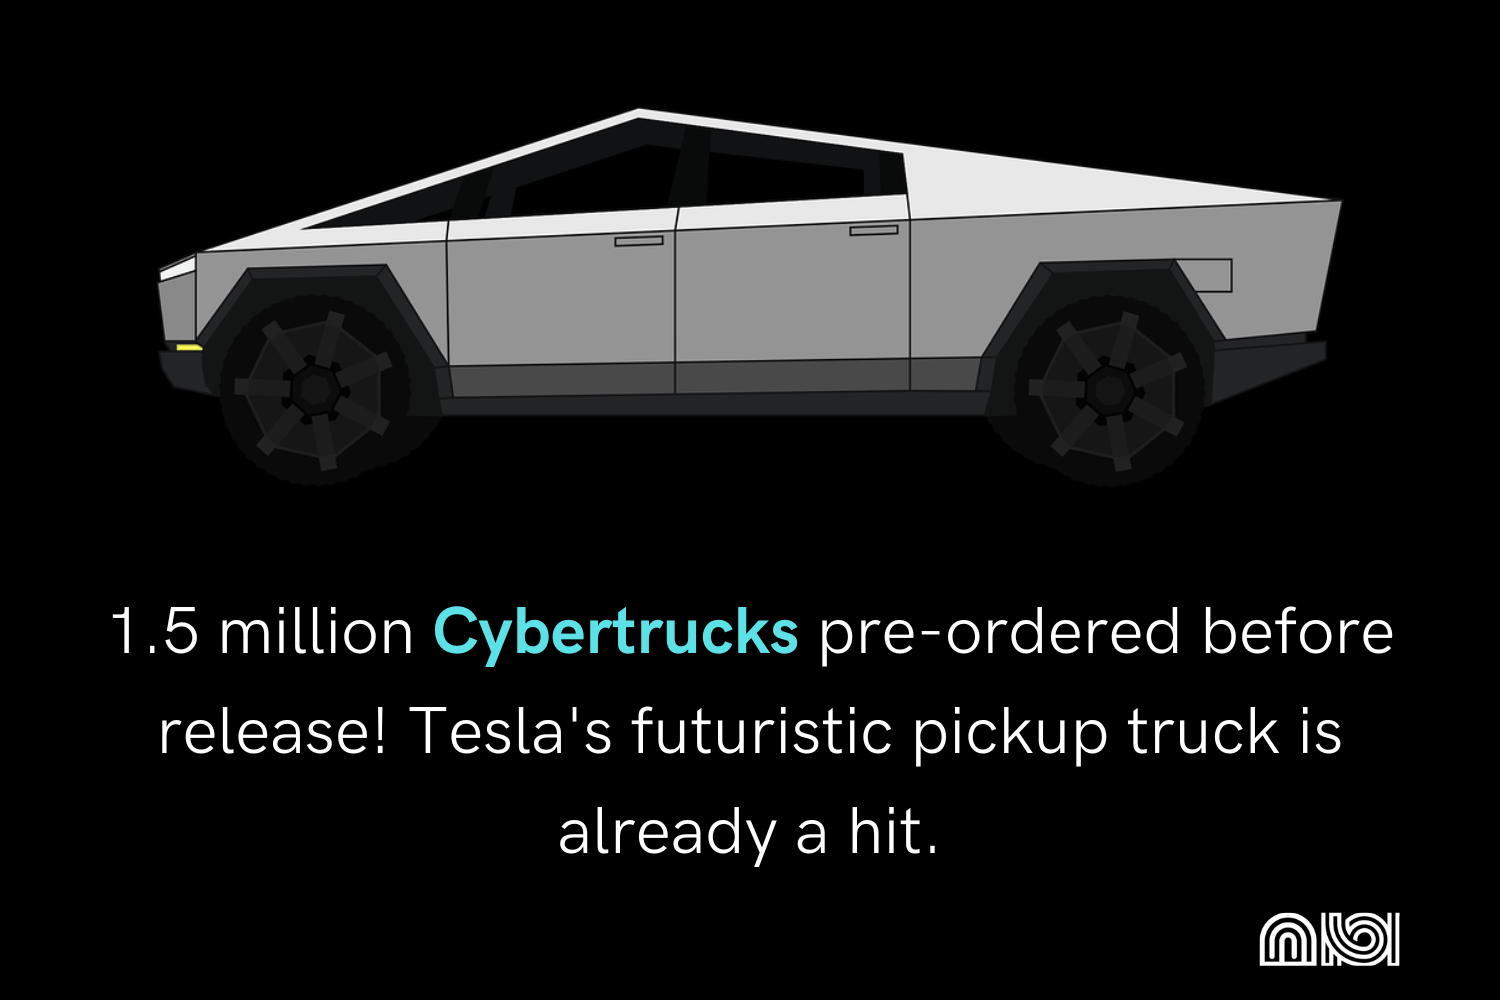 A graph showing the number of pre-orders for the Tesla Cybertruck, which has already surpassed 1.5 million. The truck is described as futuristic and a hit.